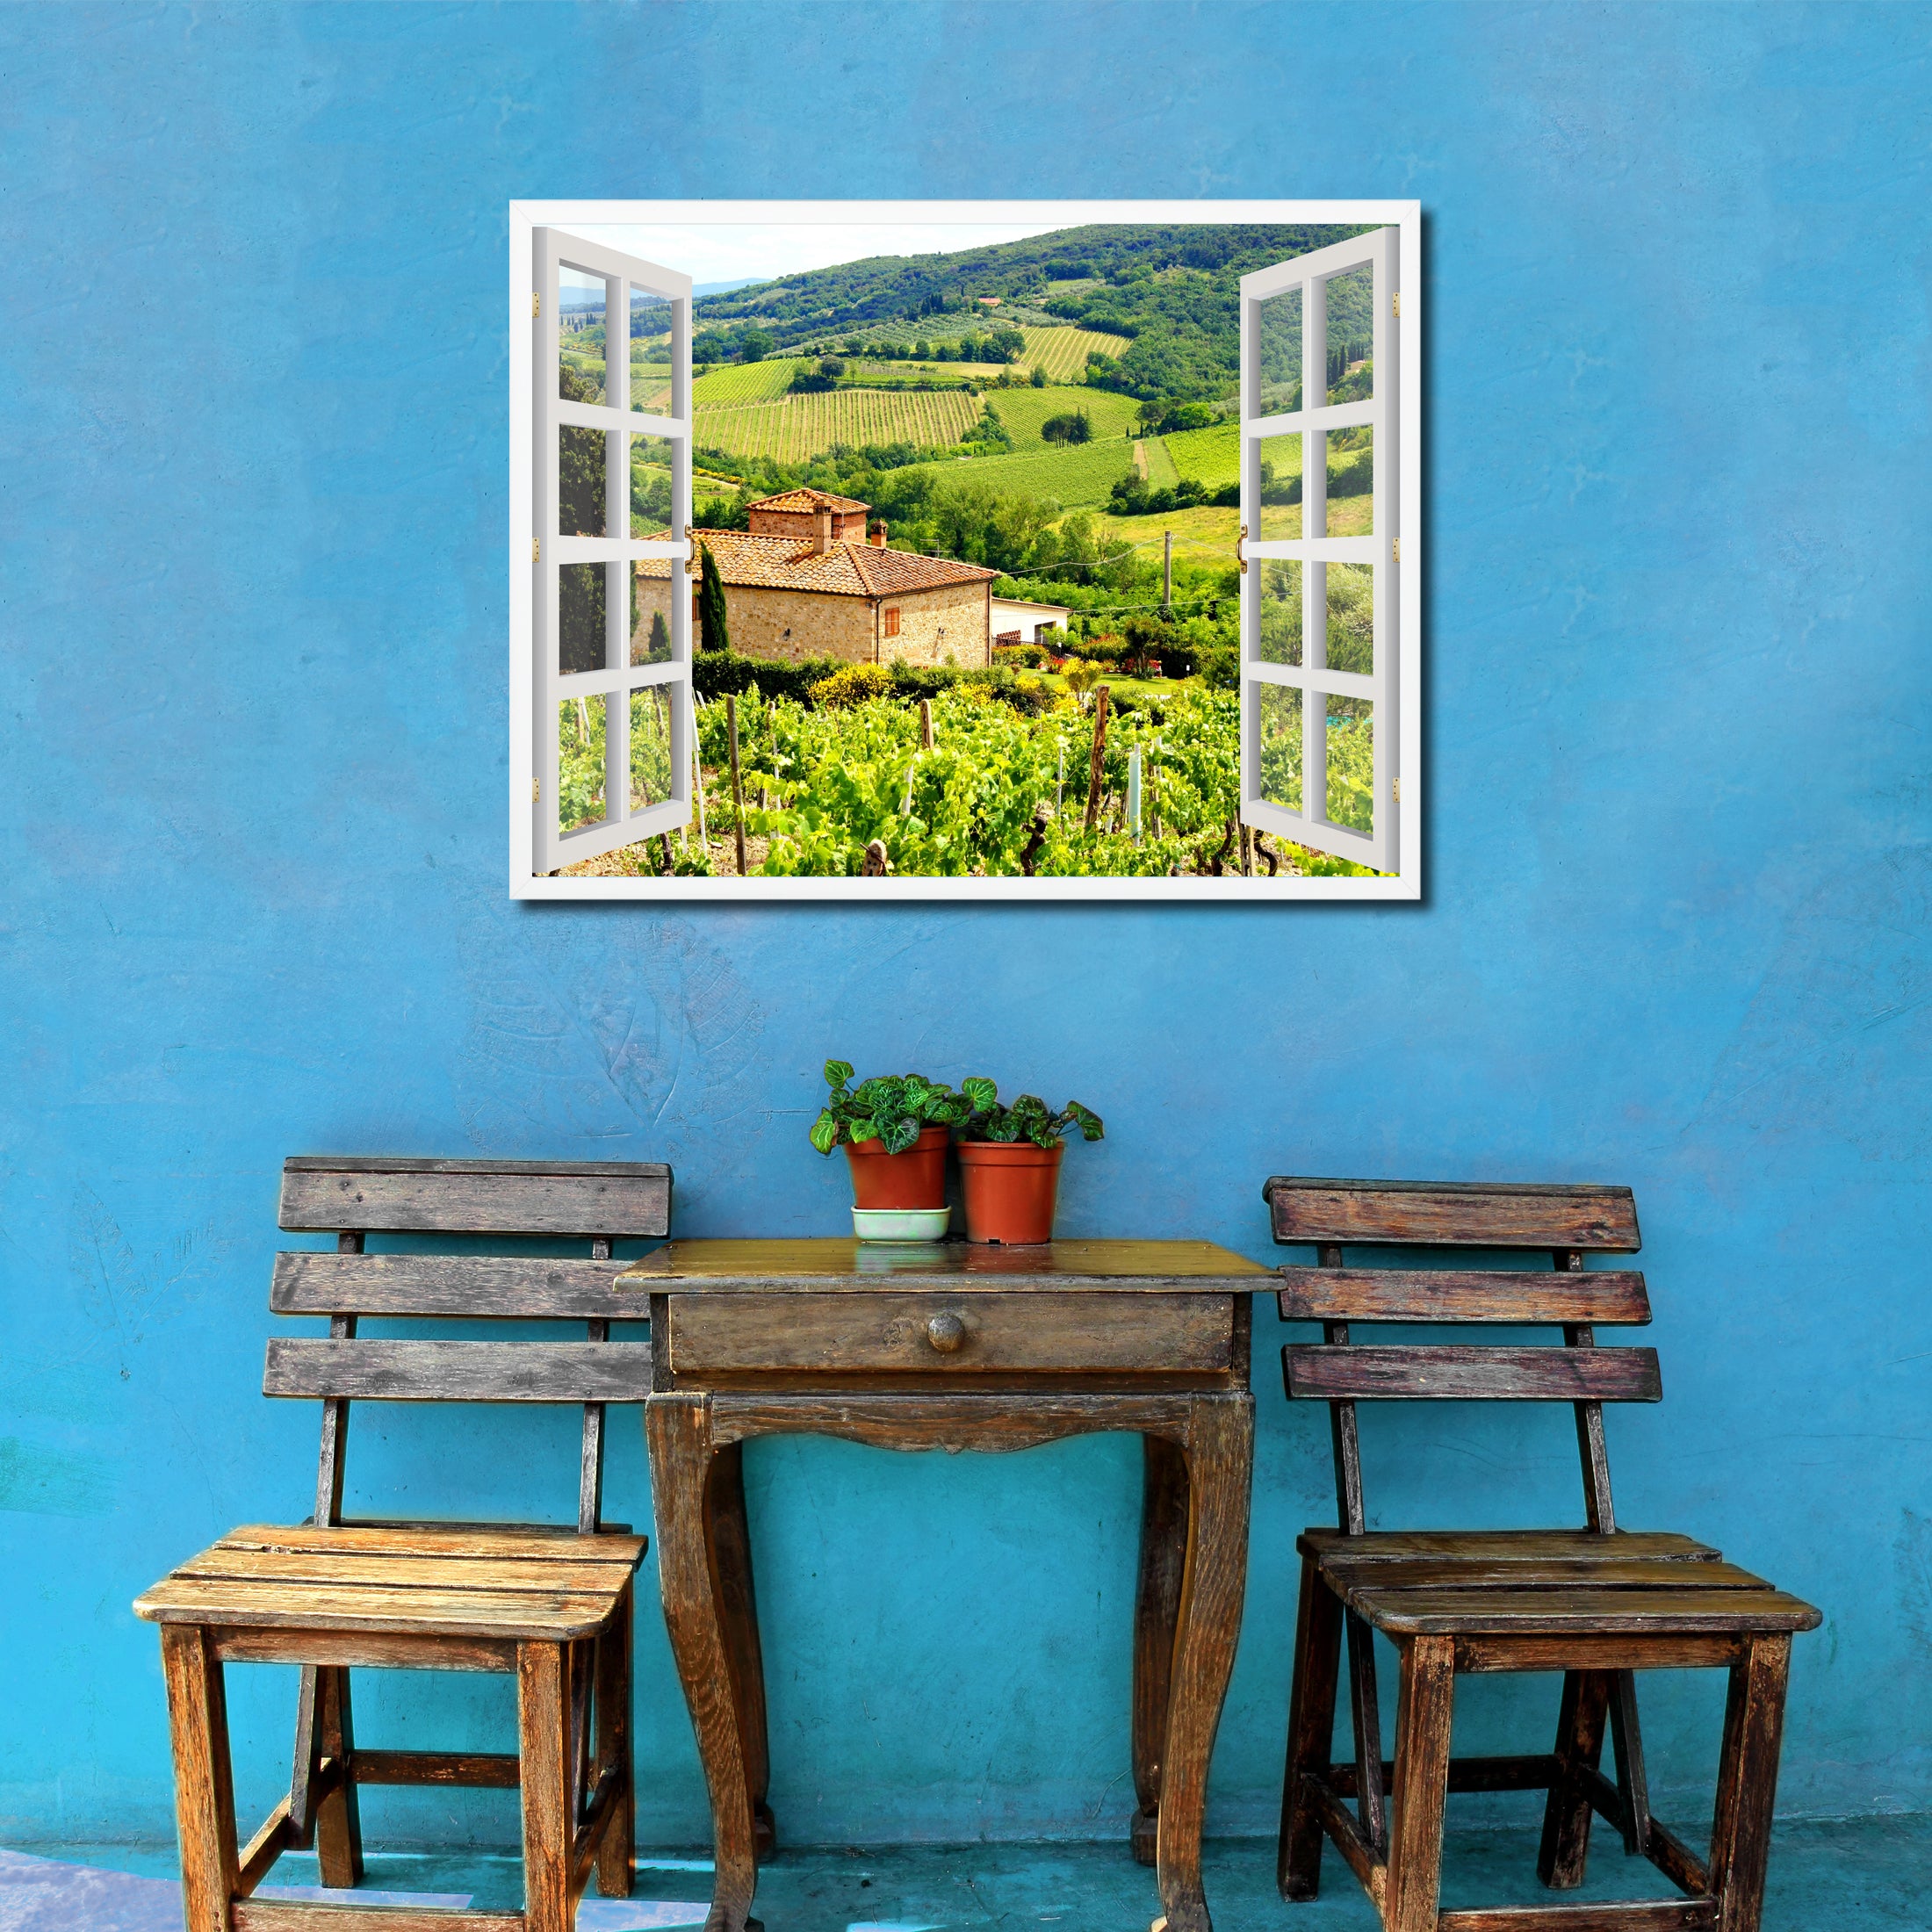 Wine Vineyards Tuscany Italy Picture French Window Framed Canvas Print Home Decor Wall Art Collection